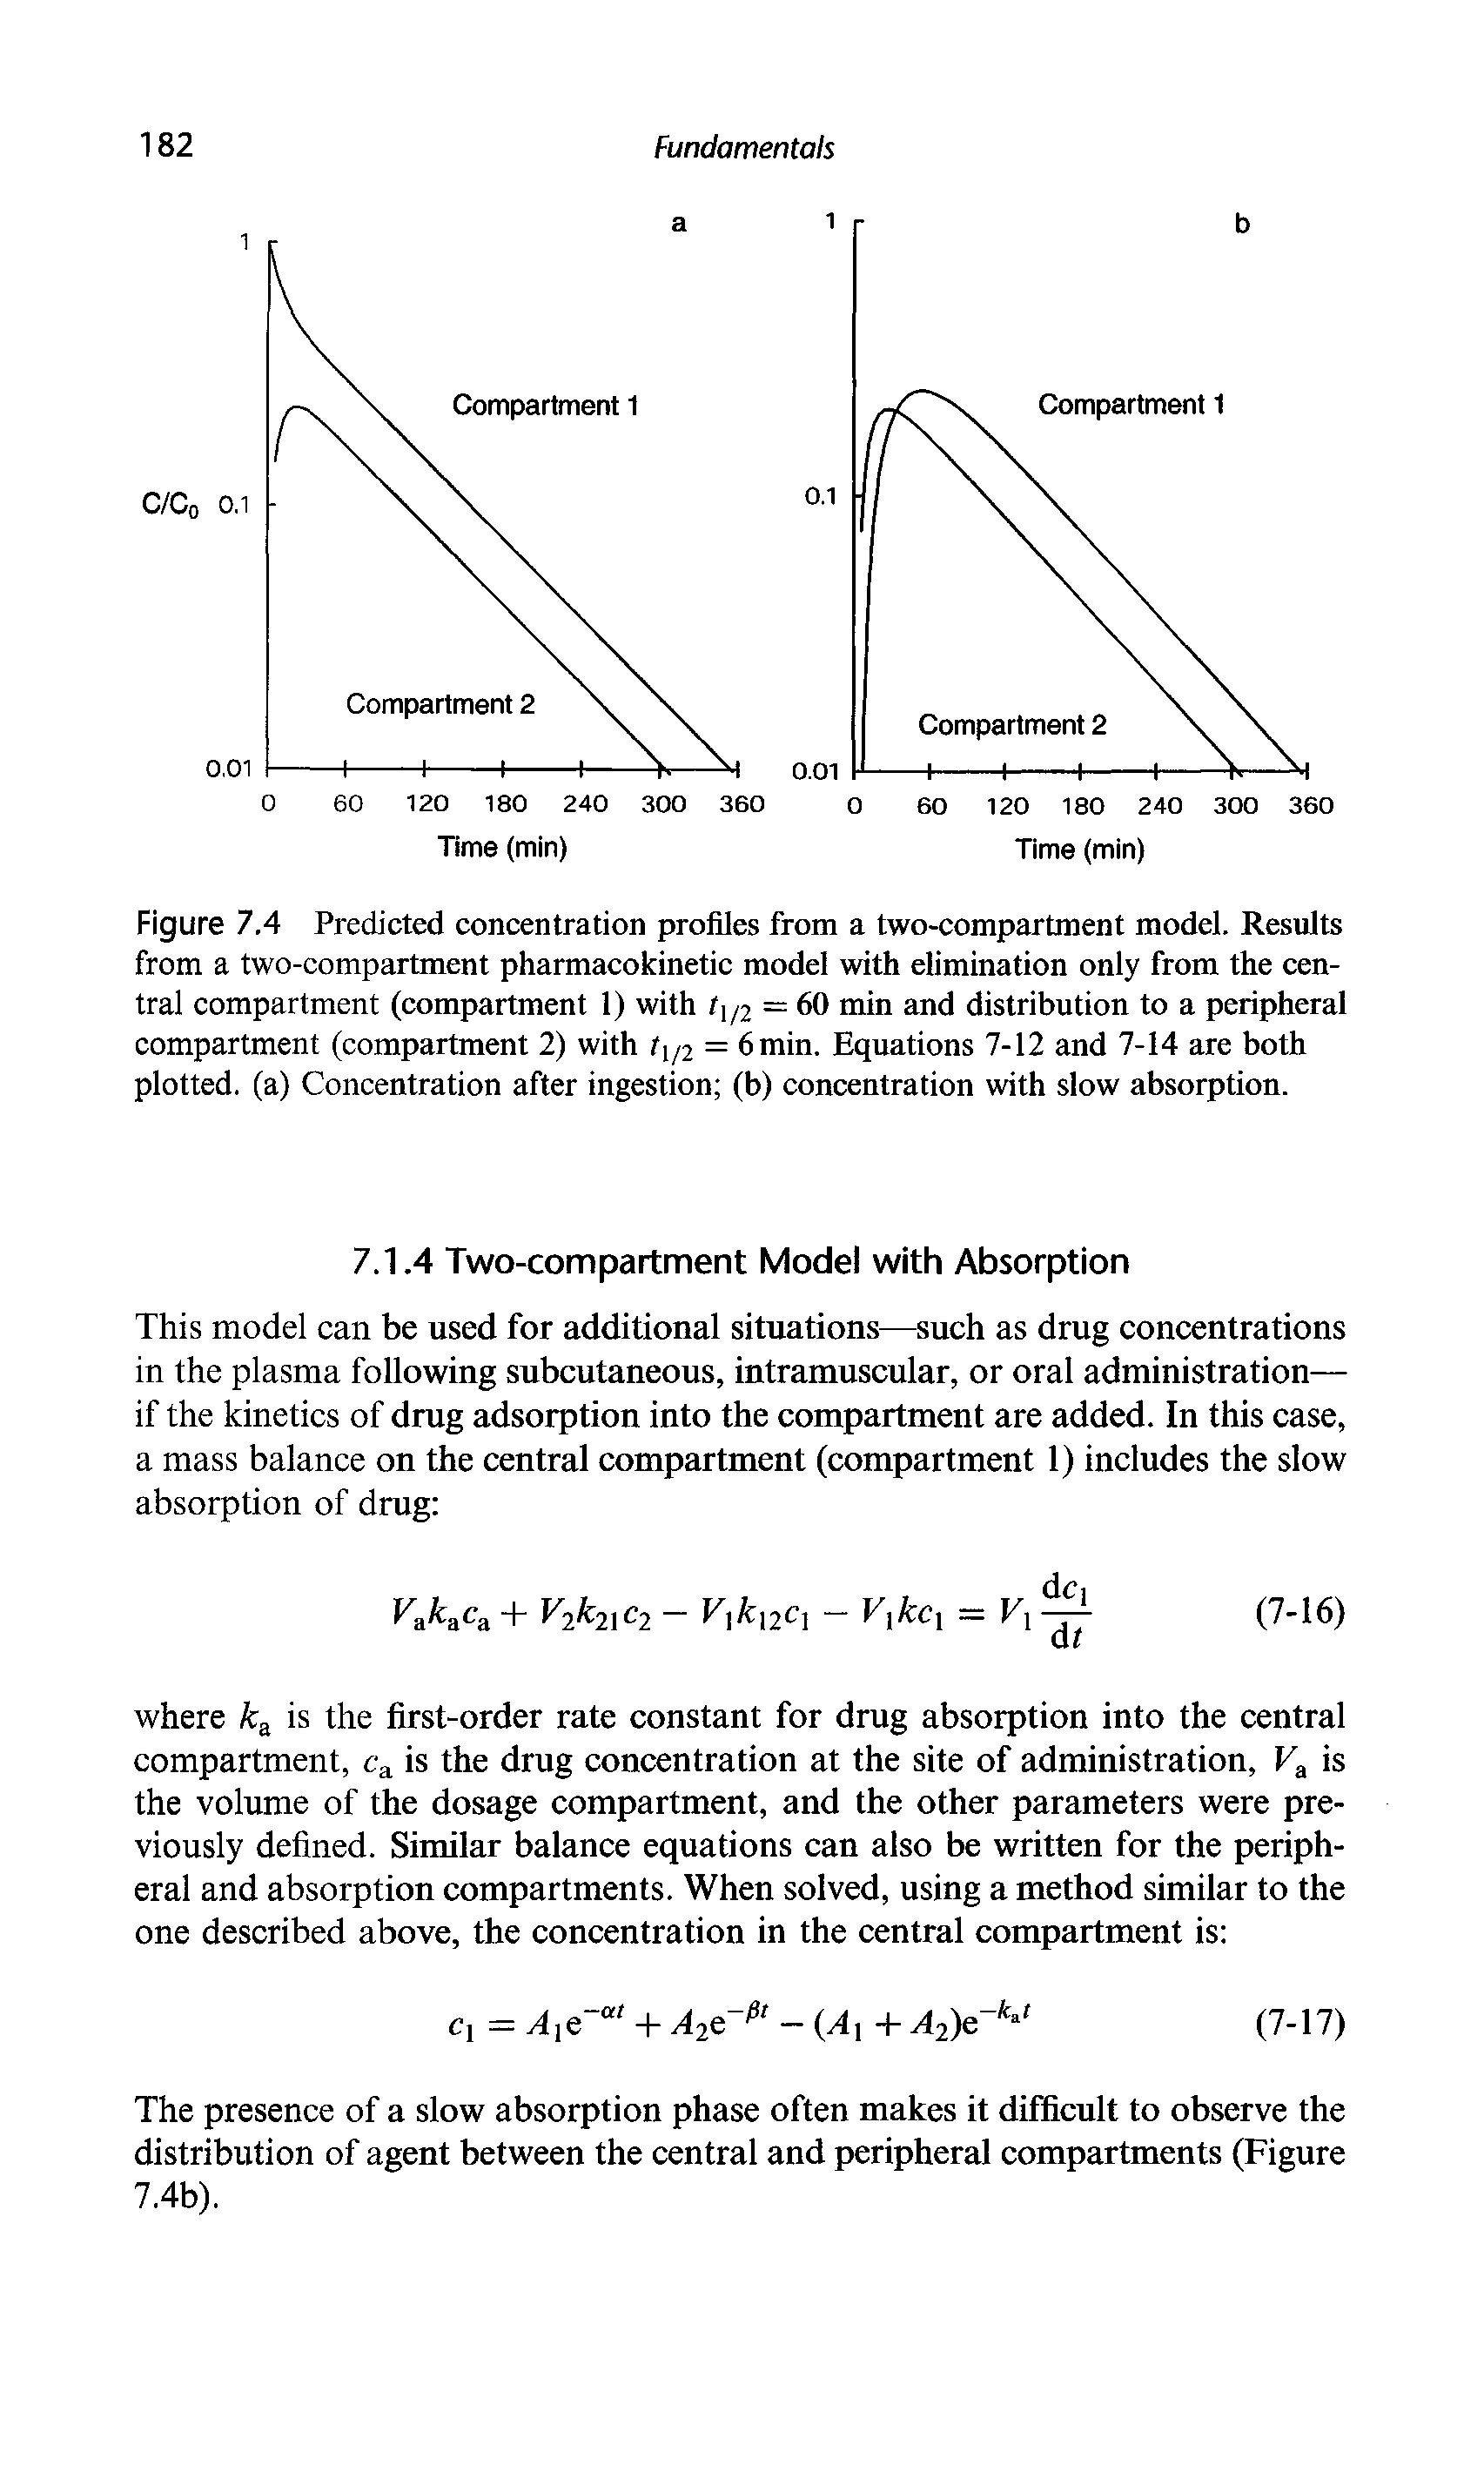 Figure 7.4 Predicted concentration profiles from a two-compartment model. Results from a two-compartment pharmacokinetic model with elimination only from the central compartment (compartment 1) with ti/2 — 60 min and distribution to a peripheral compartment (compartment 2) with ti/2 = 6 min. Equations 7-12 and 7-14 are both plotted, (a) Concentration after ingestion (b) concentration with slow absorption.